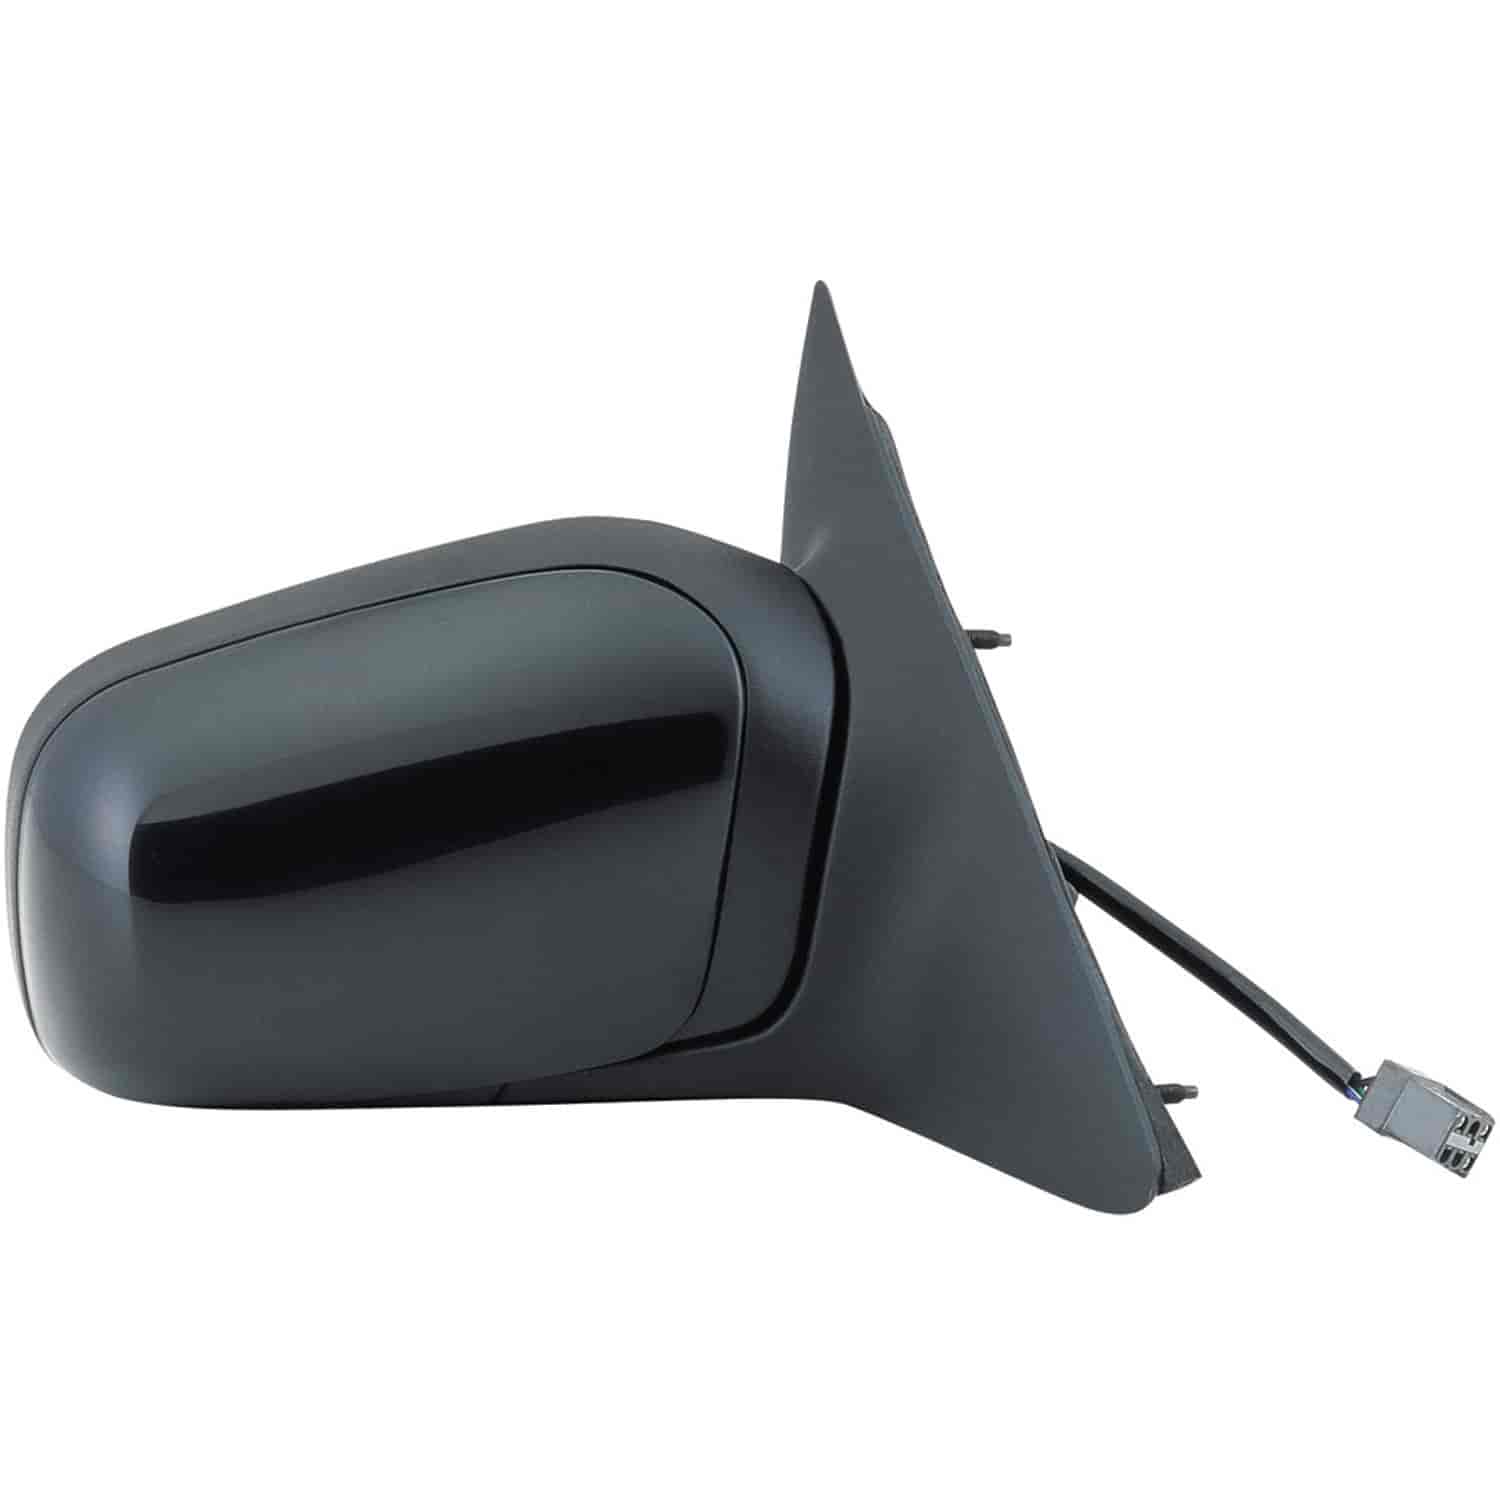 OEM Style Replacement mirror for 95-96 Ford Crown